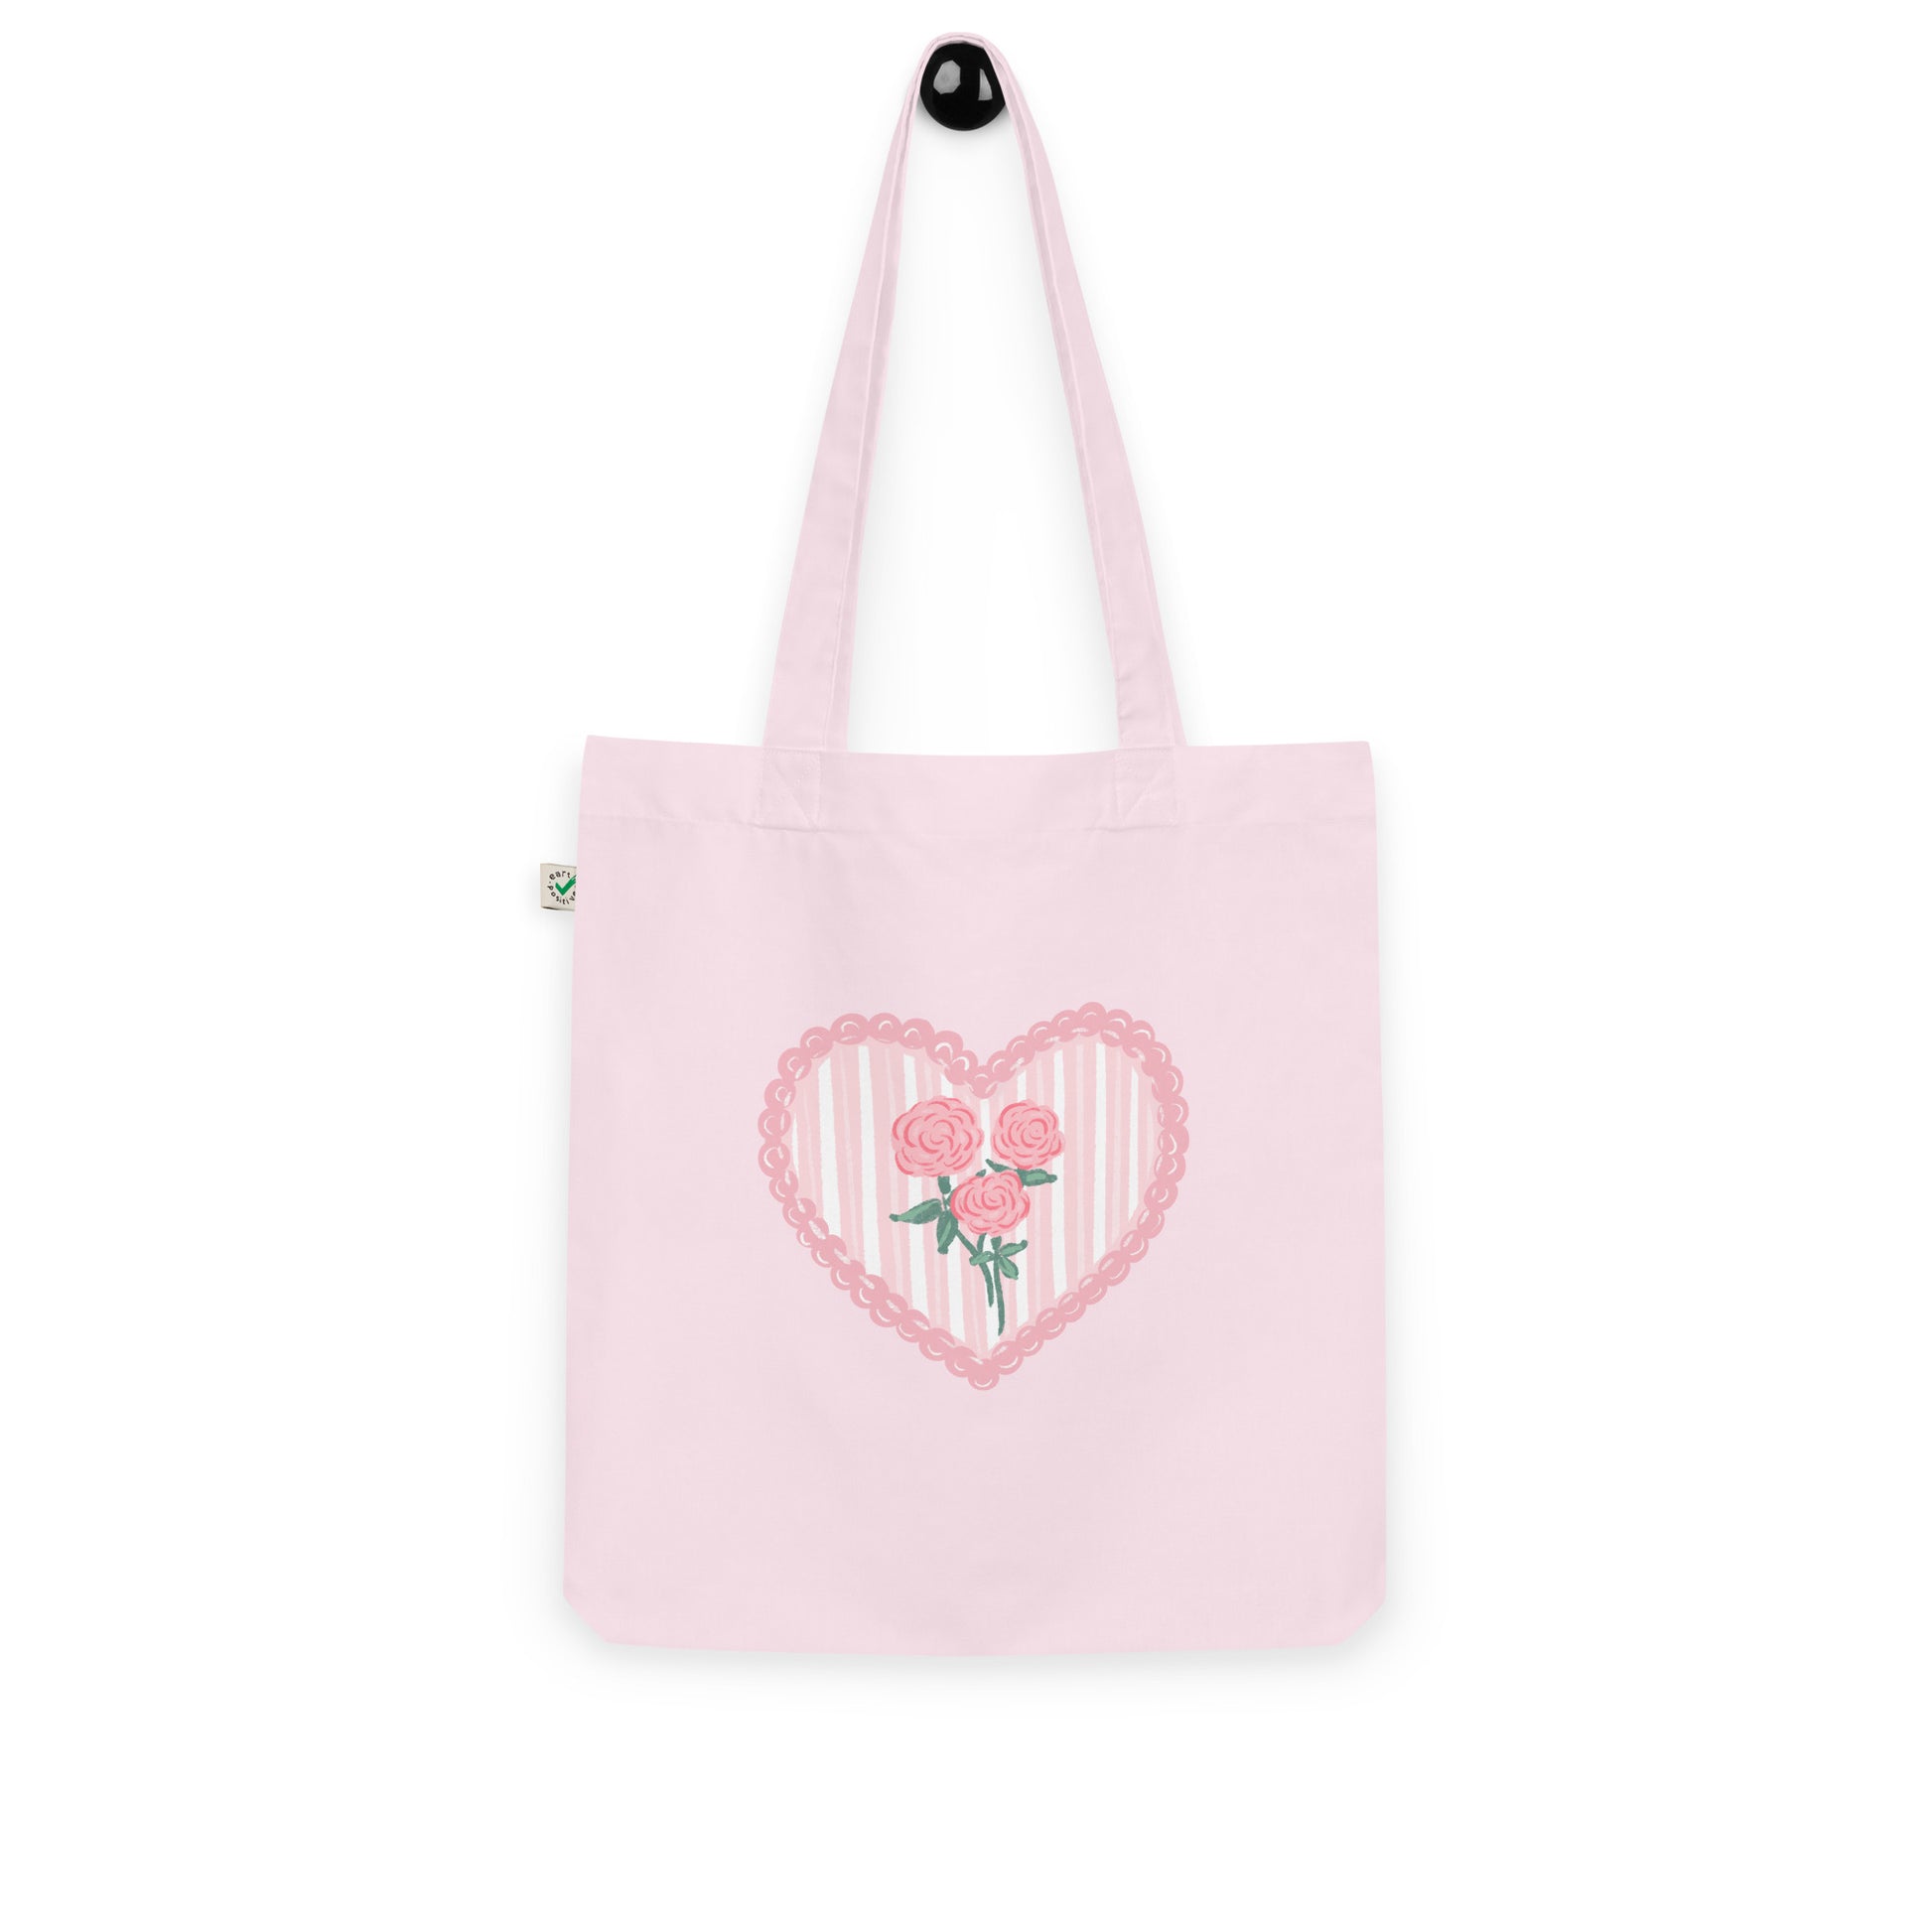 Light Pink & Mint Bandana Tote Bag - Made in the USA - Cotton